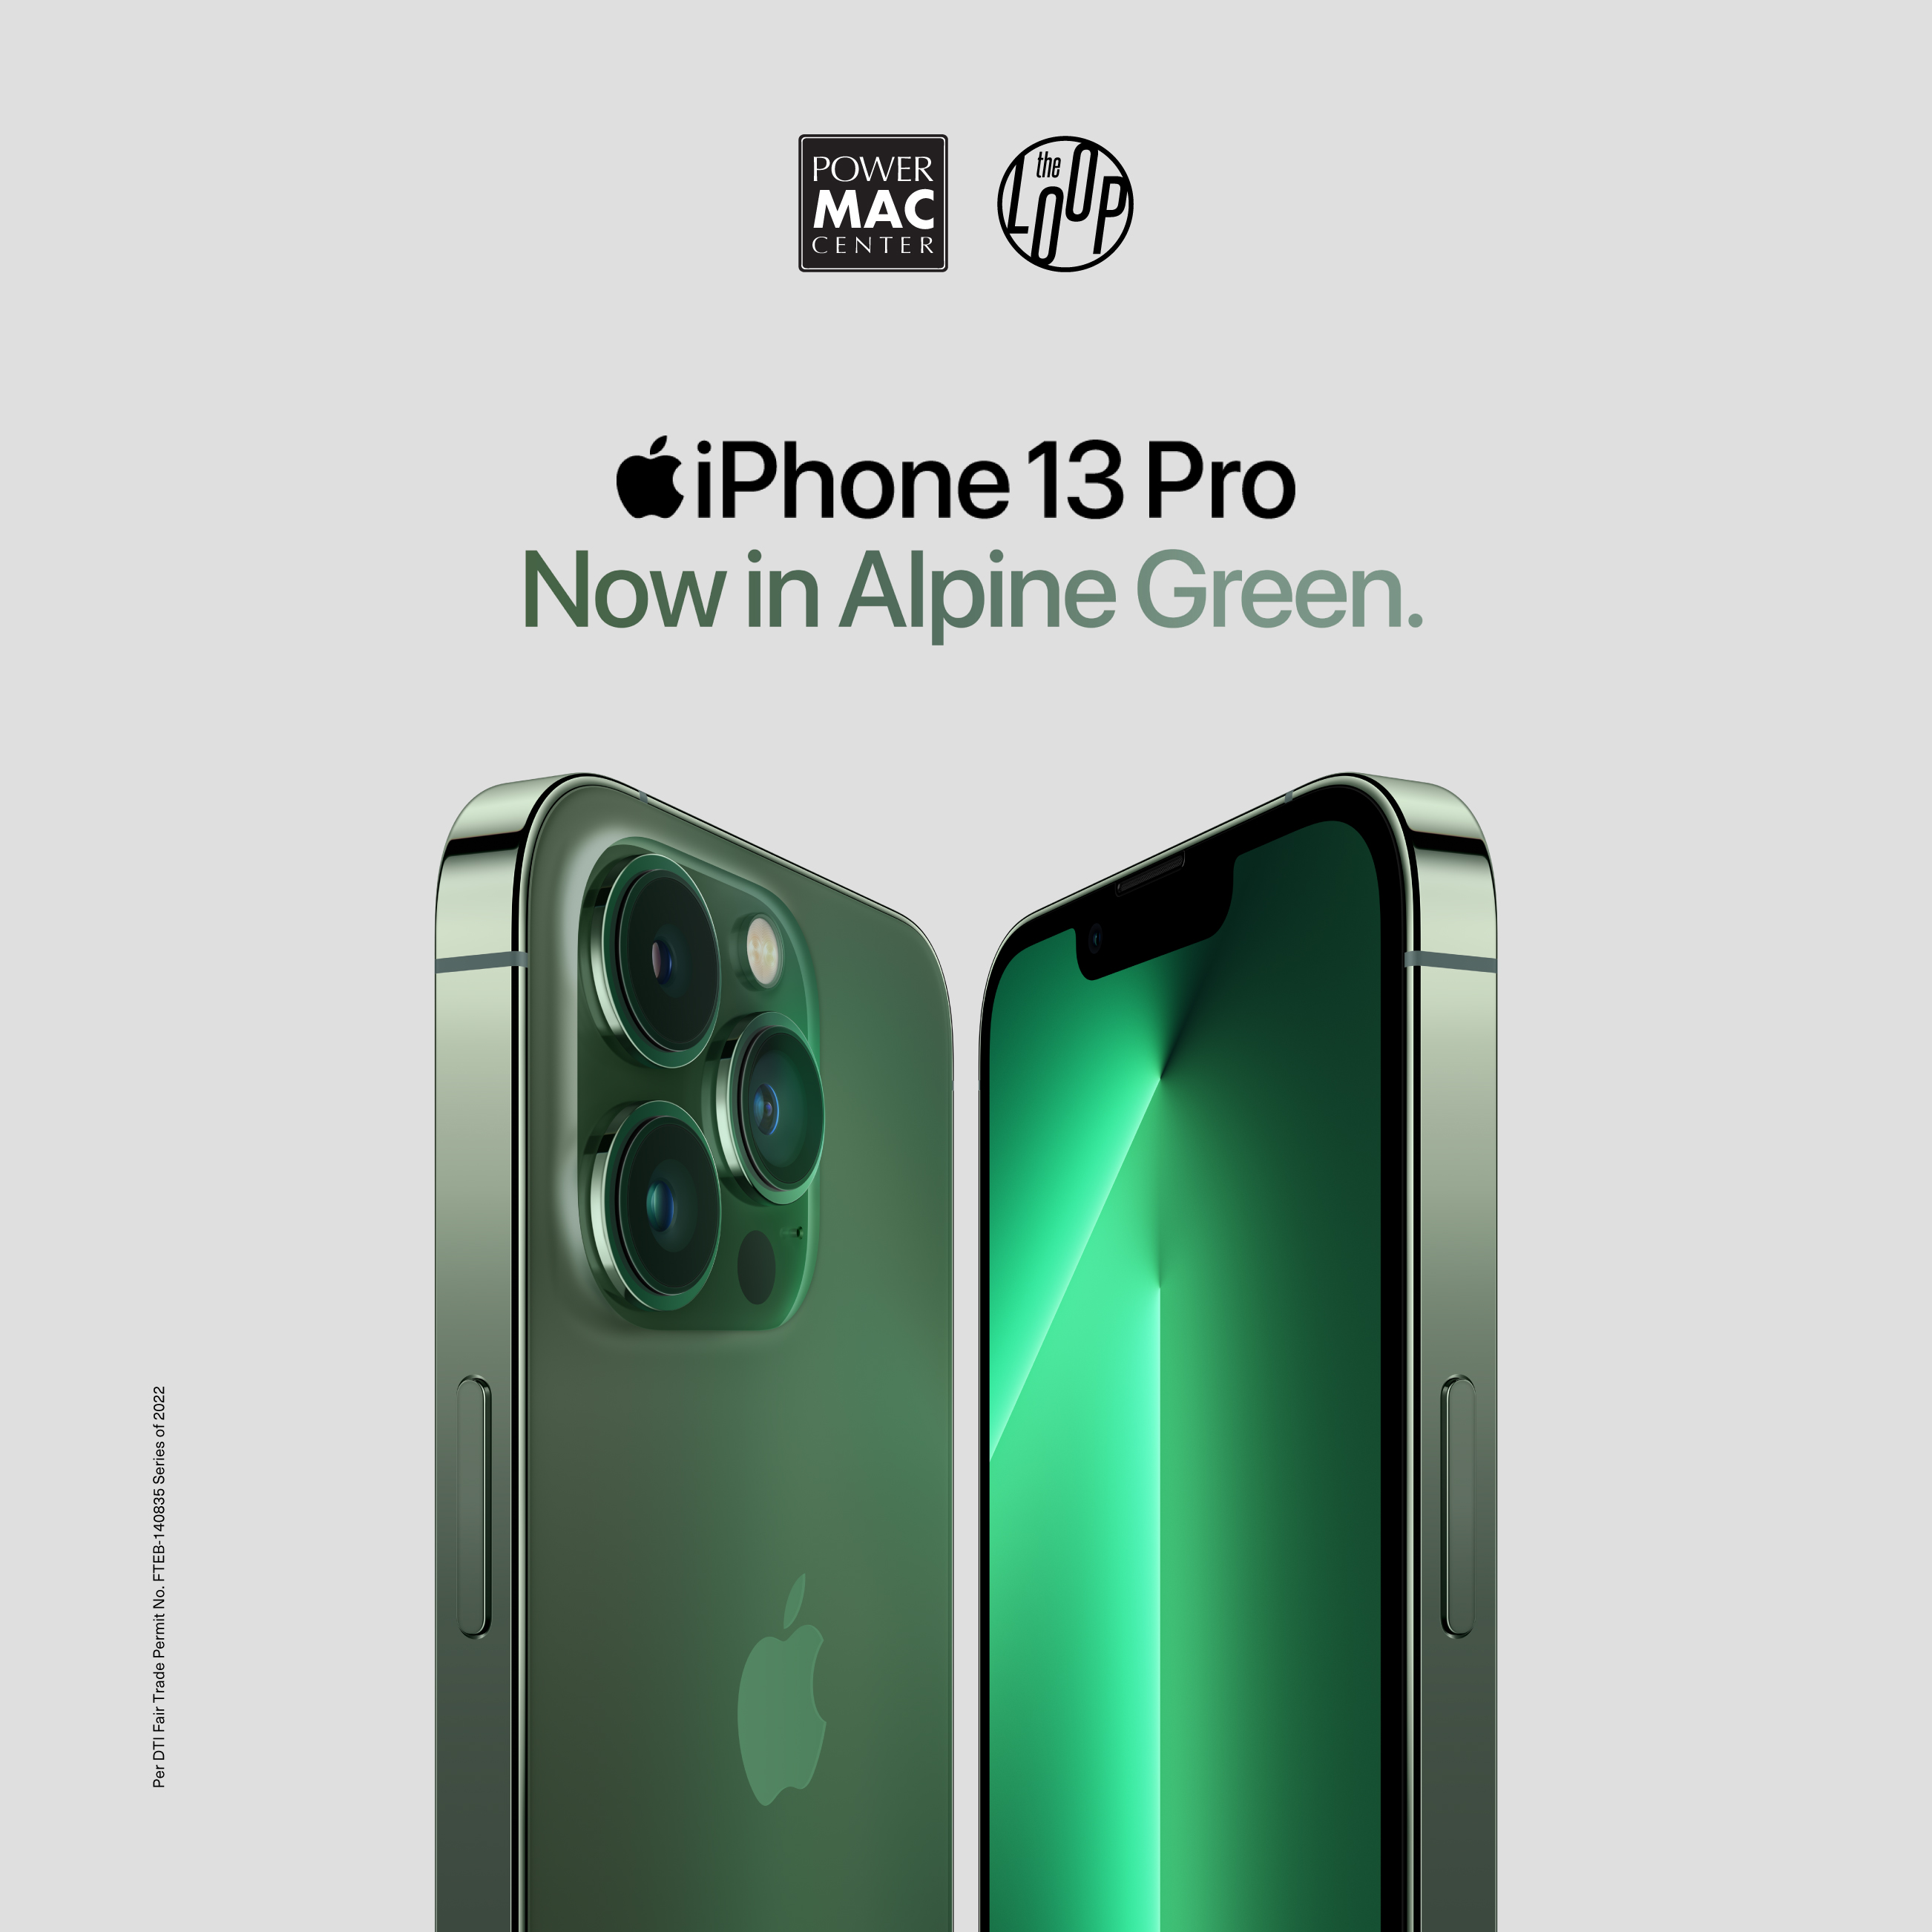 Check out Apple's new 'Green' and 'Alpine Green' iPhone 13/13 Pro